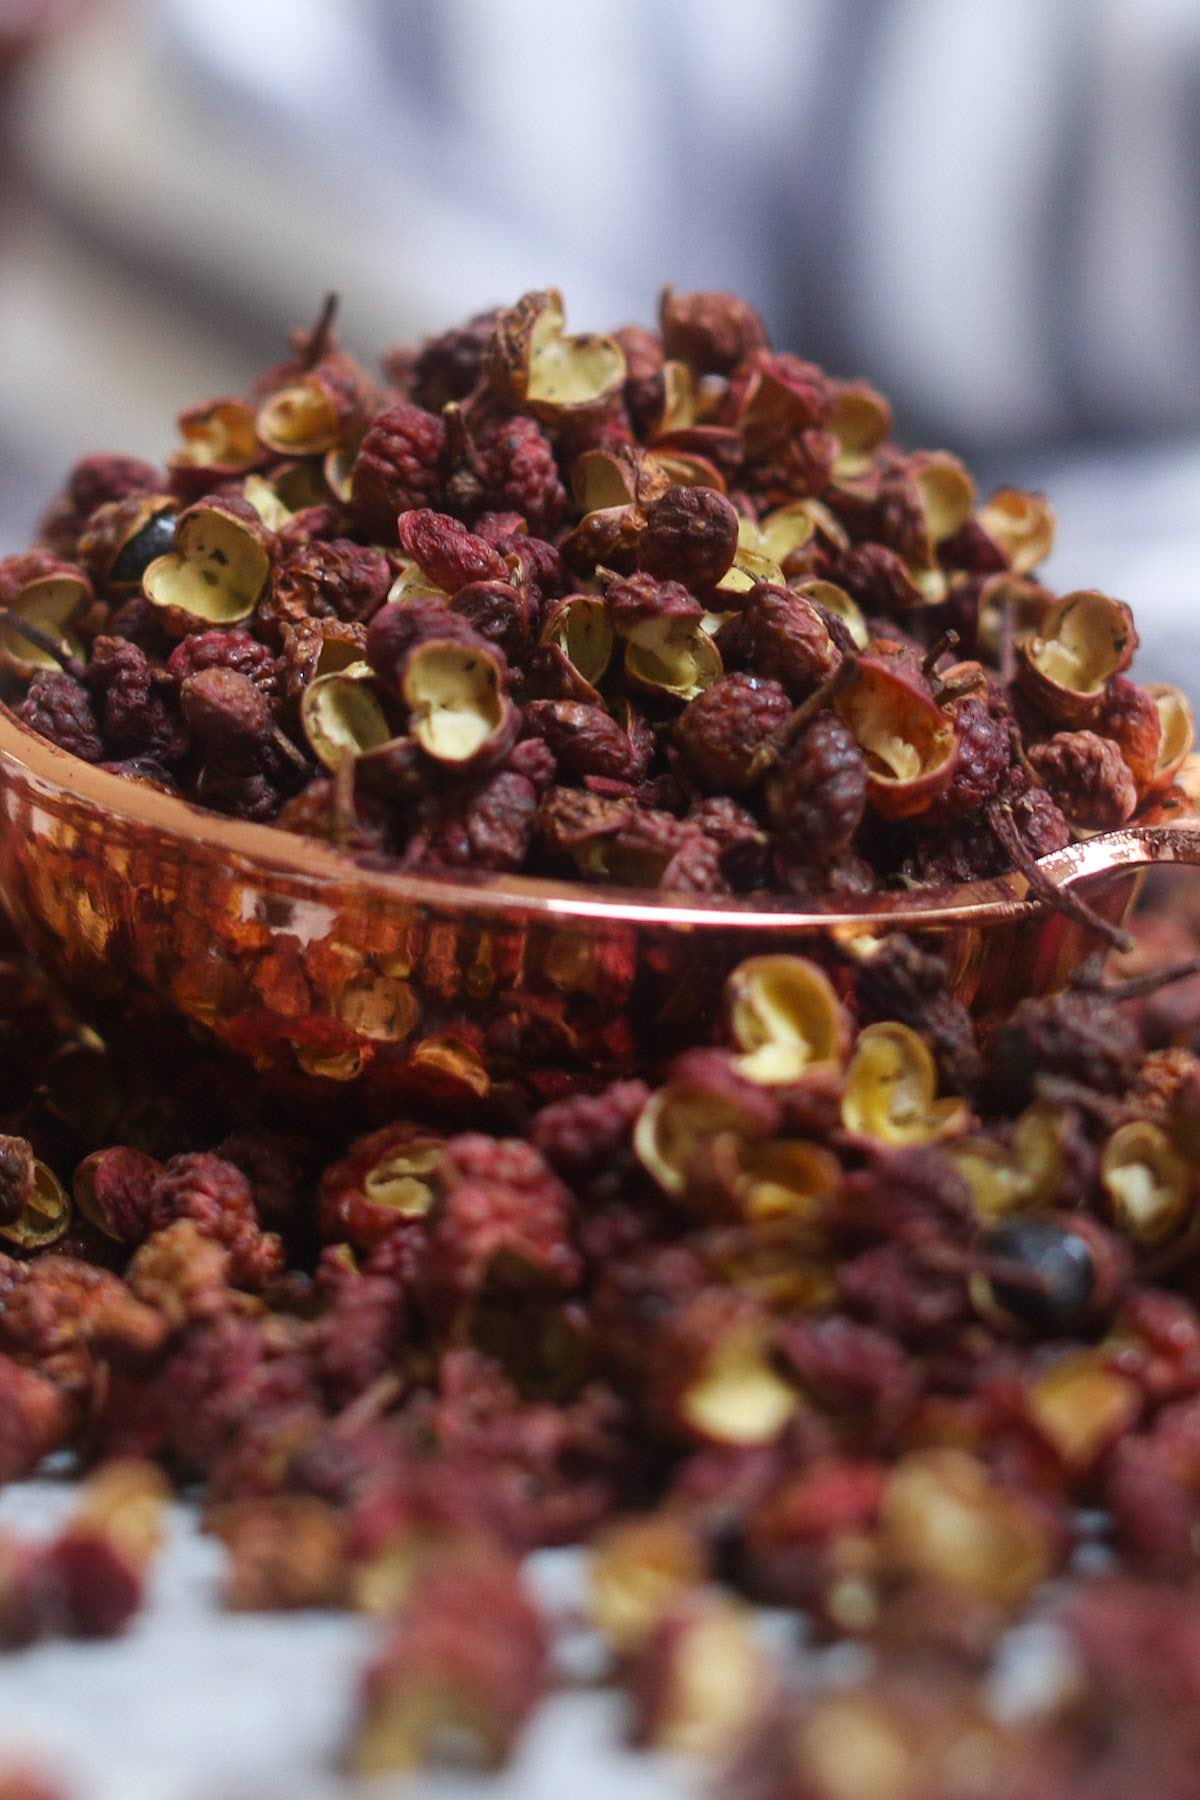 Szechuan peppercorn is a spice produced from the pinkish-red husks of seeds of the prickly ash tree (Zanthoxylum).